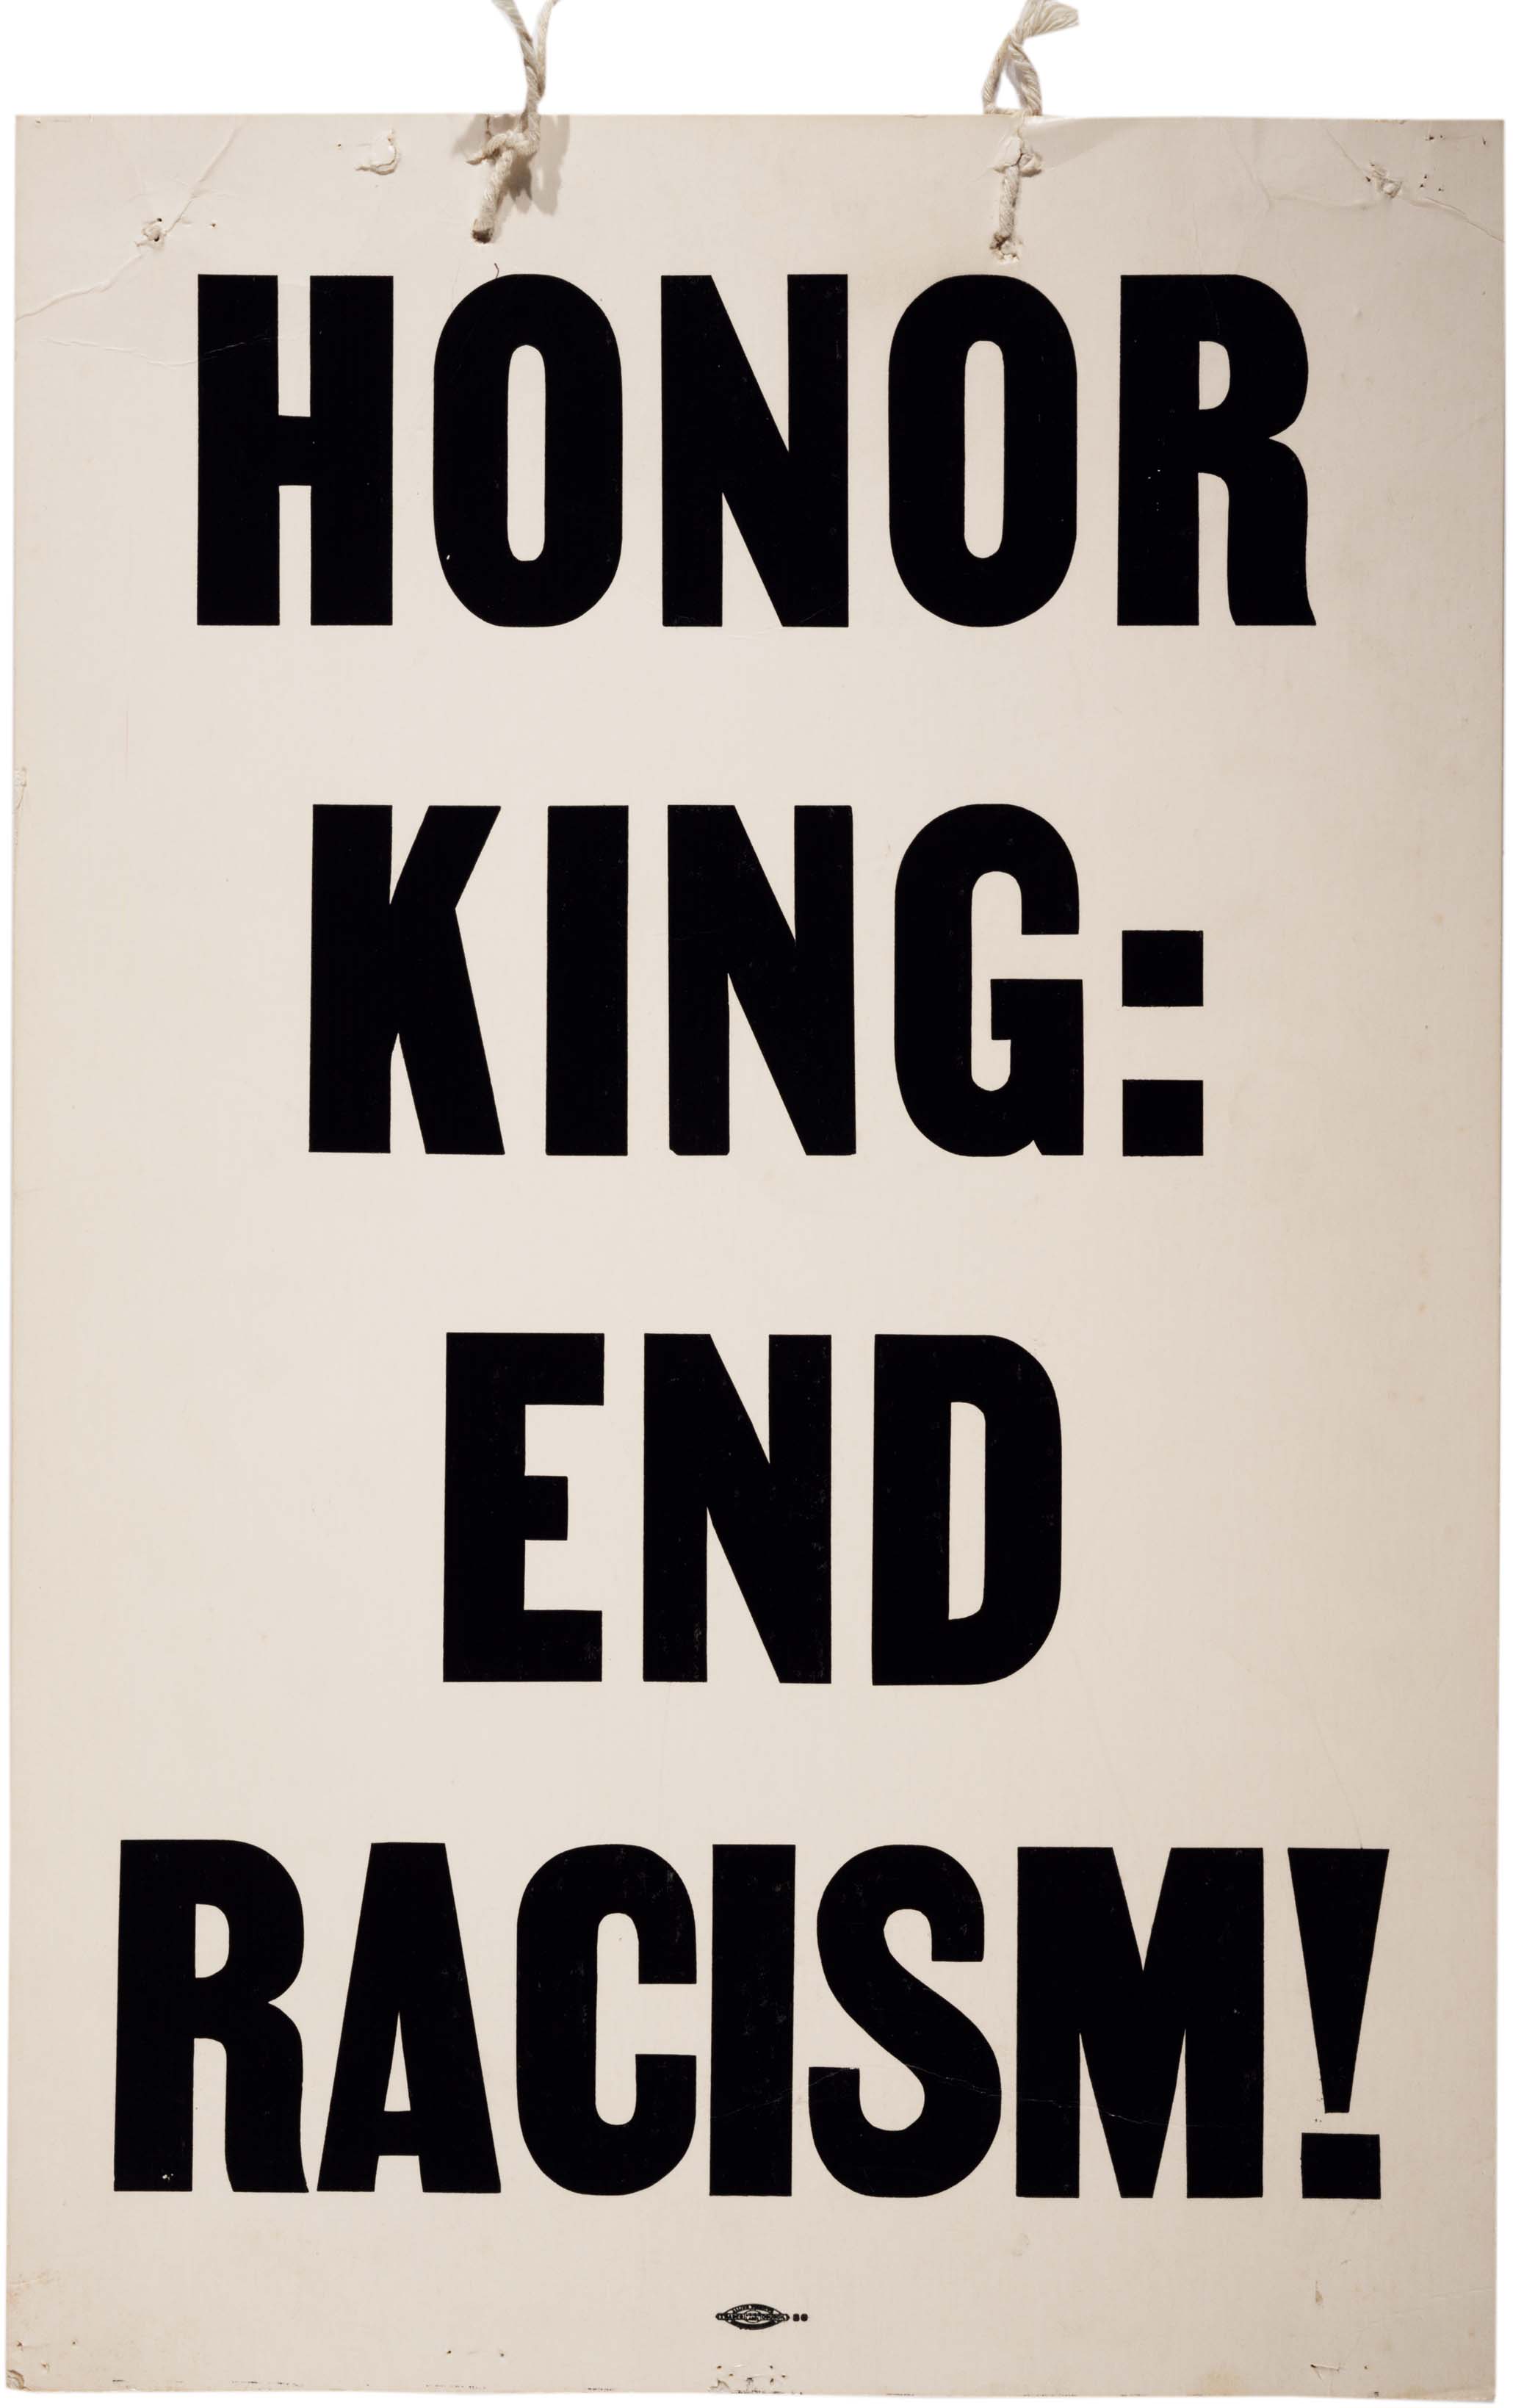 The Revolutionary Lives of Malcolm X and Martin Luther King Jr. (Broadside "HONOR KING: END RADISM!" from the Sanitation Workers Strike of 1968)